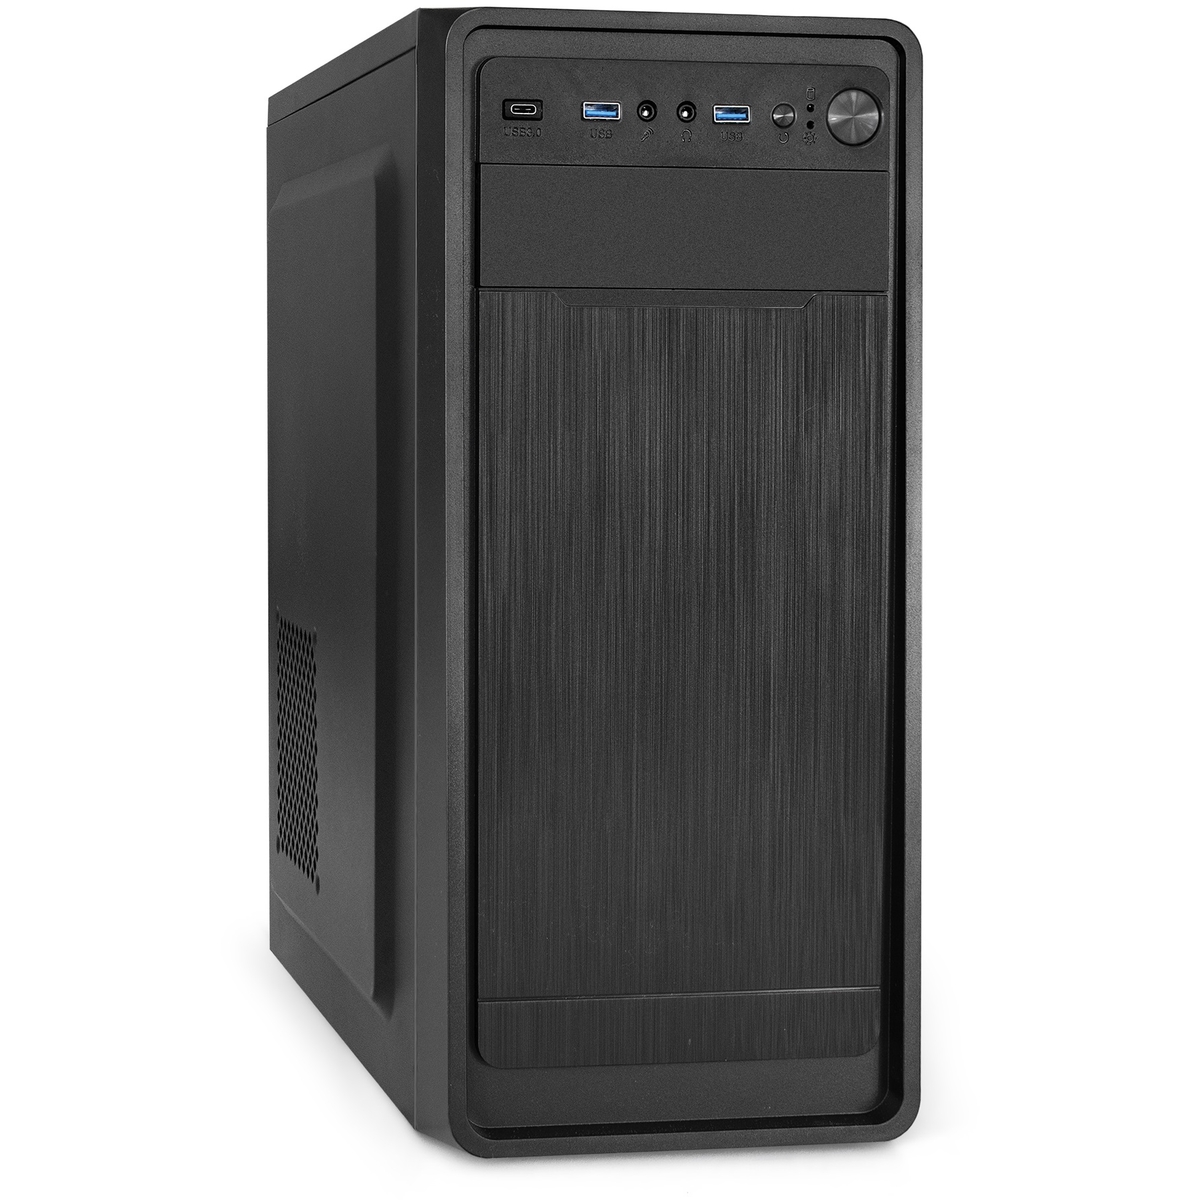  Miditower ExeGate XP-332UC-XP450